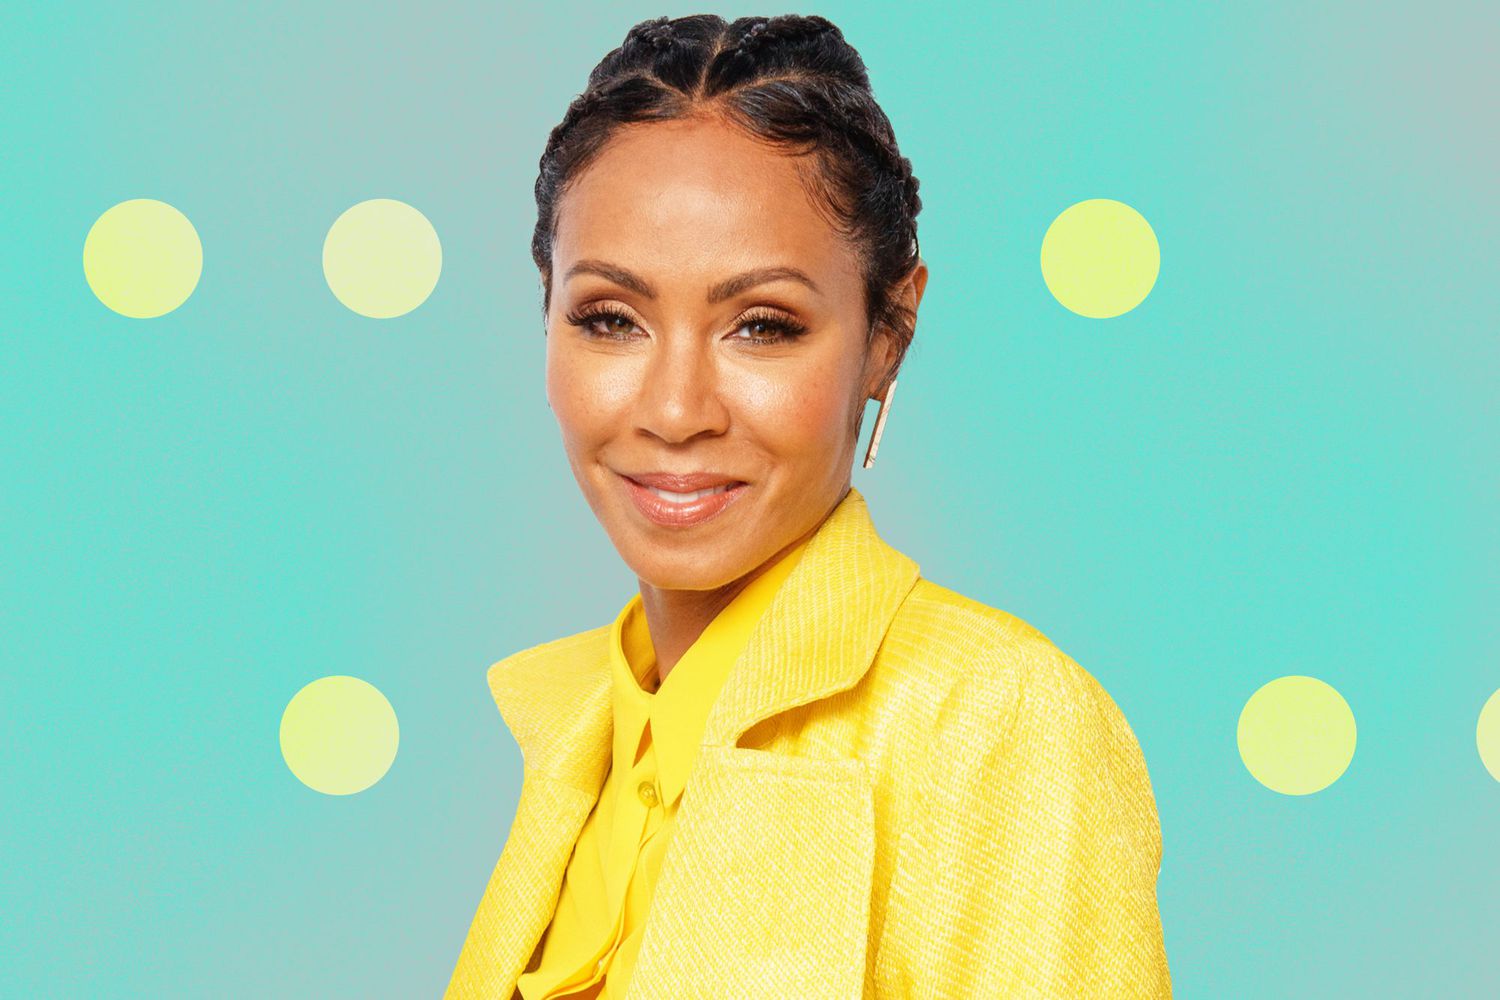 Jada-Pinkett-Smith-On-The-Challenges-of-Maintaining-a-Good-Sex-Life-After-Decades-Long-Marriage-GettyImages-819004172